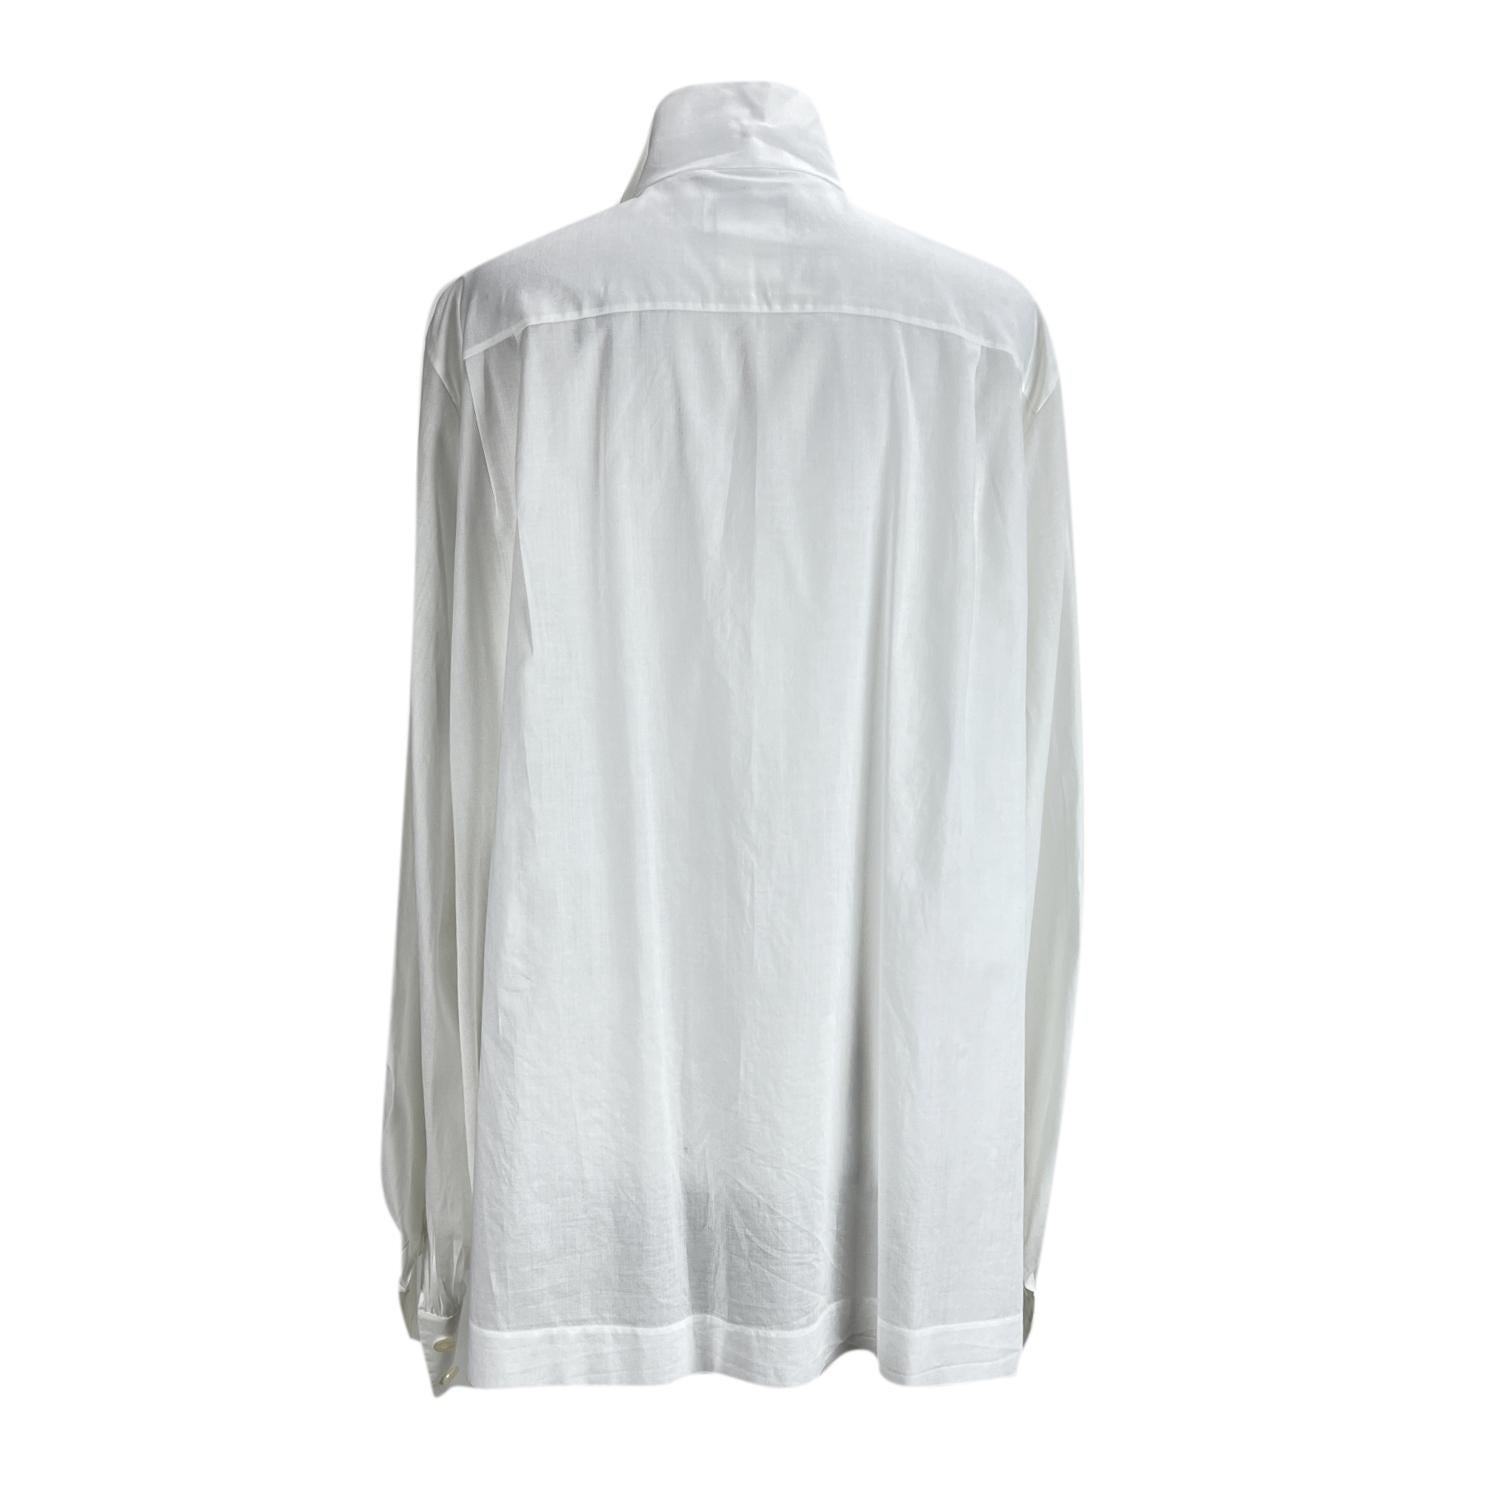 Chanel white blouse shirt with front pintucked bib. Button closure on the front. Long sleeve with buttoned cuffs. 2 front pockets. Composition: 100% cotton. Size: 38 FR (The size shown for this item is the size indicated by the designer on the